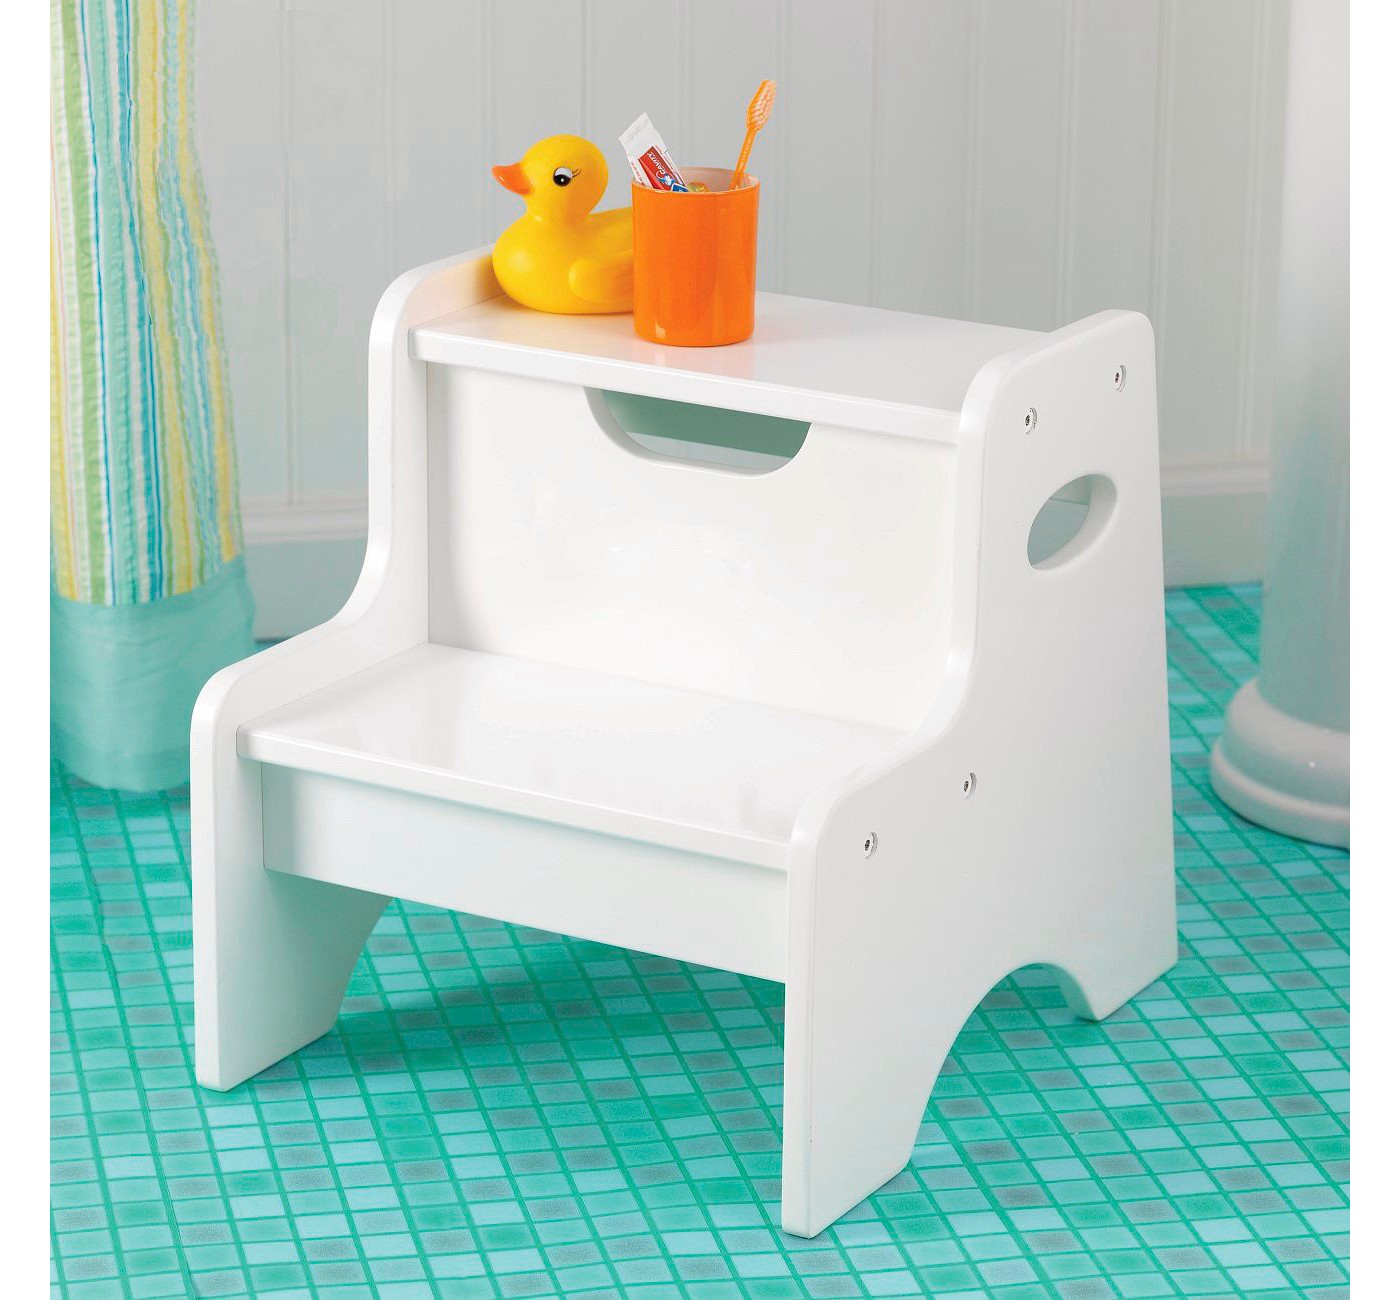 Two-step stool in white